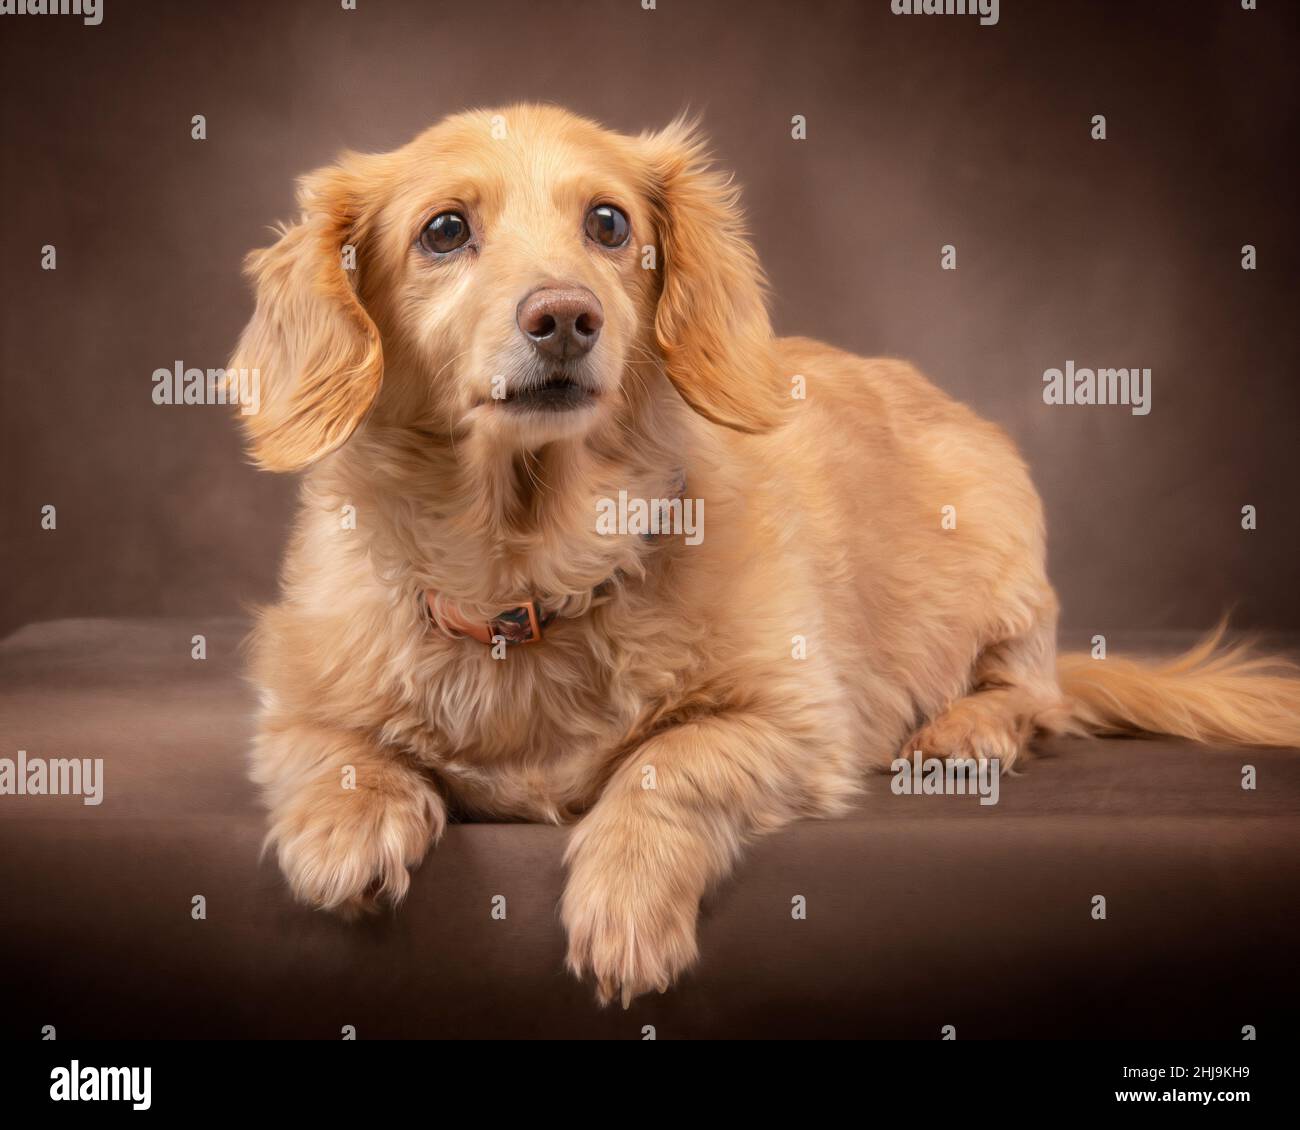 Horizontal shot of a longhaired english cream dachshund posed on a dark brown background looking slightly to the right. Stock Photo